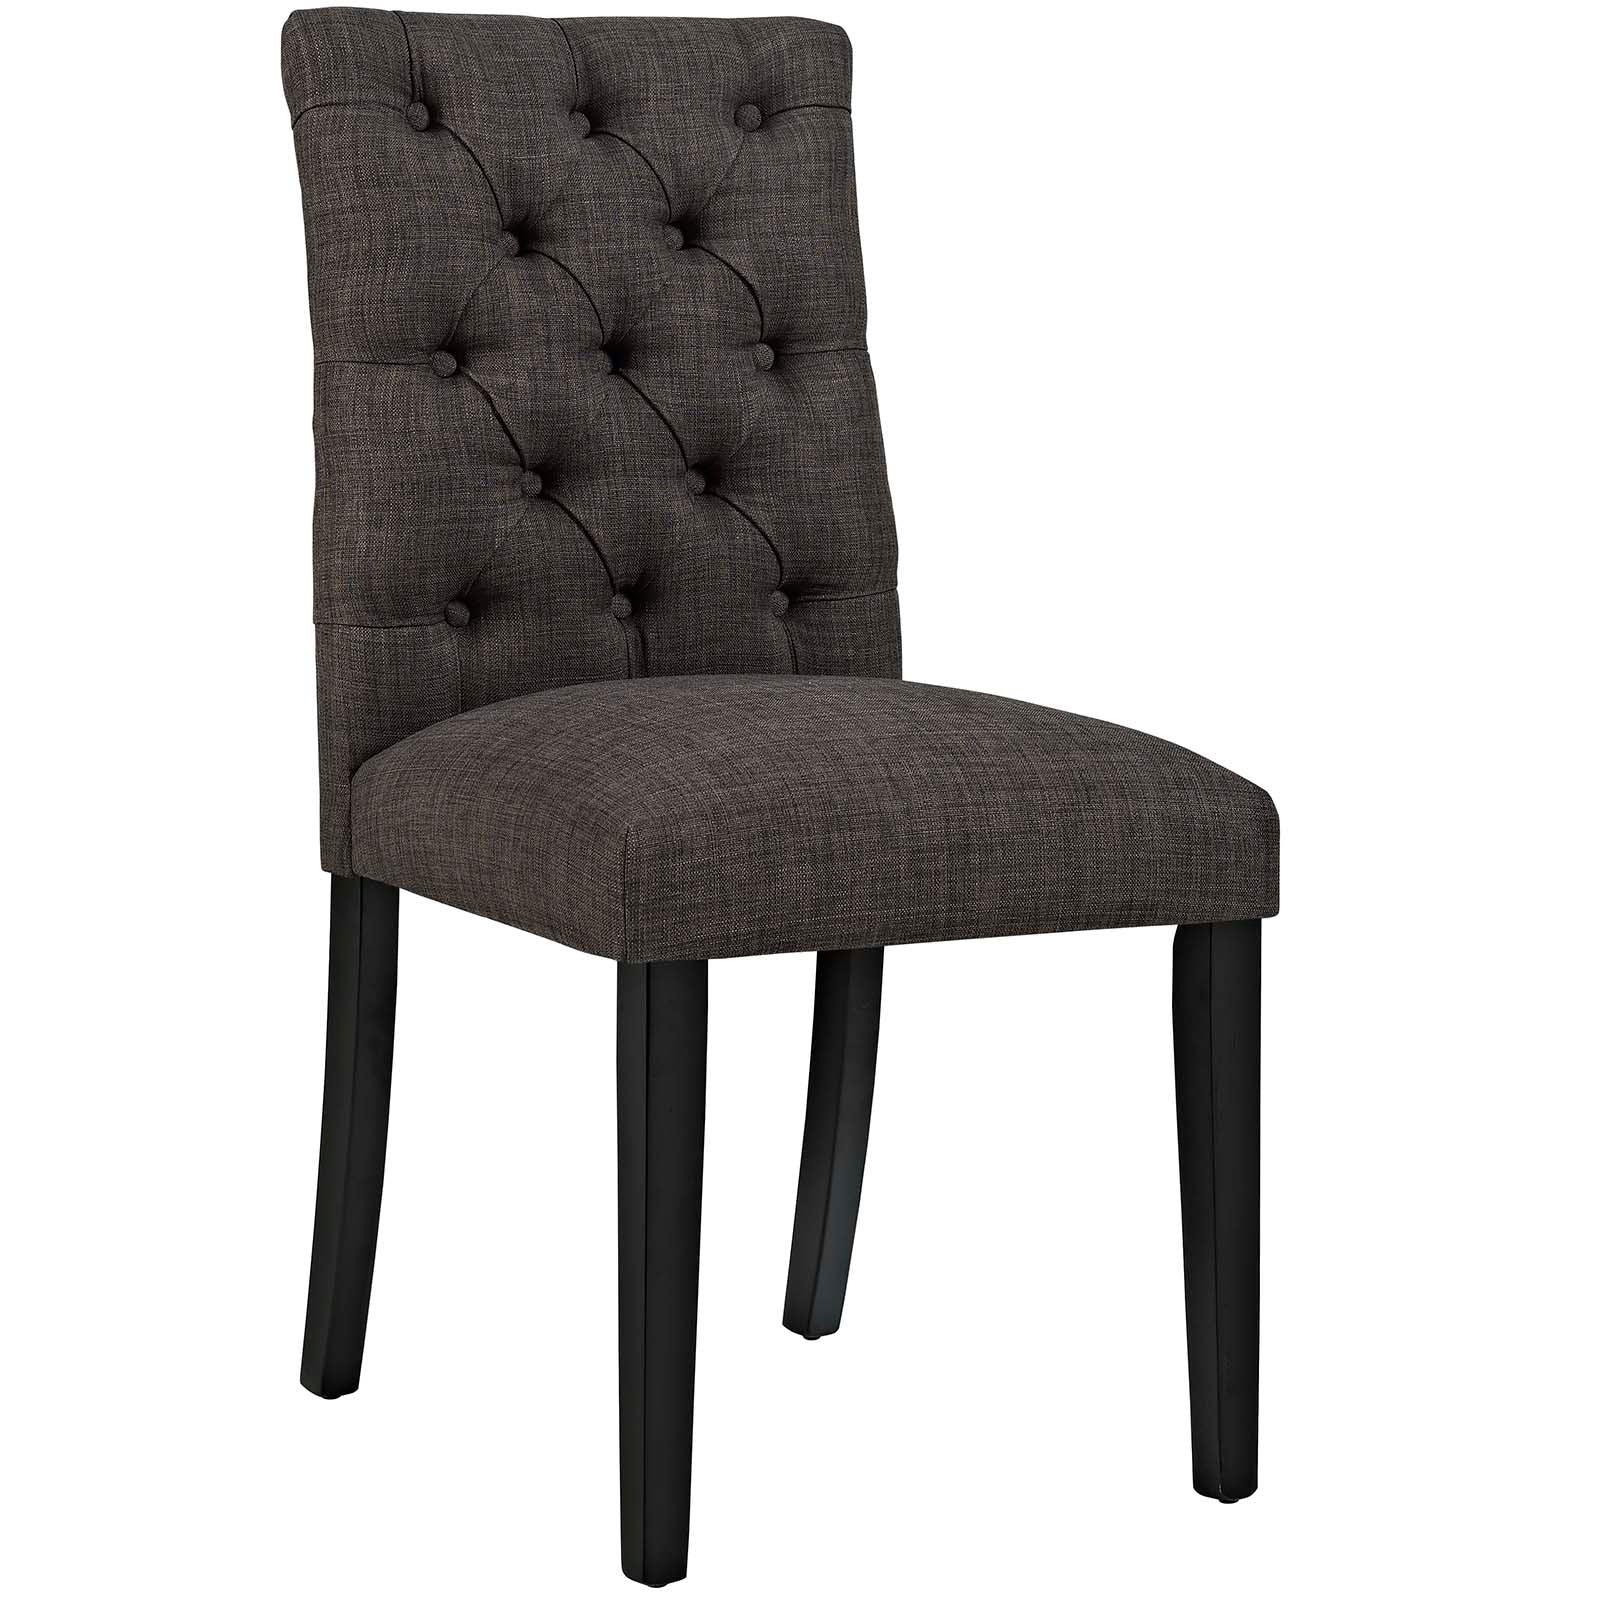 Duchess Dining Chair Fabric Set of 4 - East Shore Modern Home Furnishings